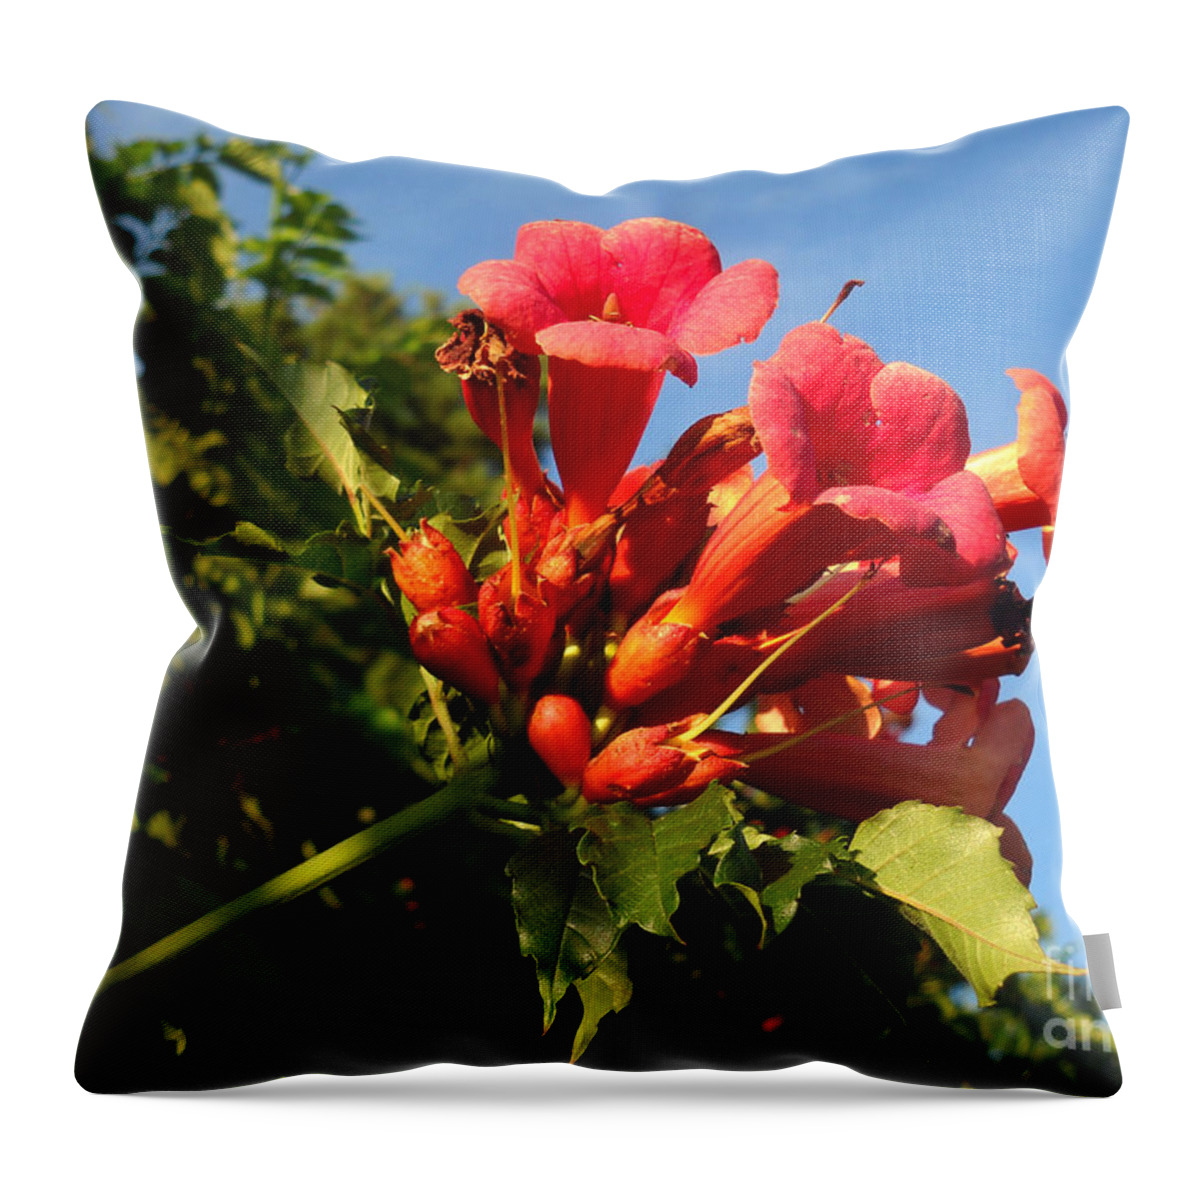 Red Throw Pillow featuring the photograph Resplendent Imperfection by Amanda Jones